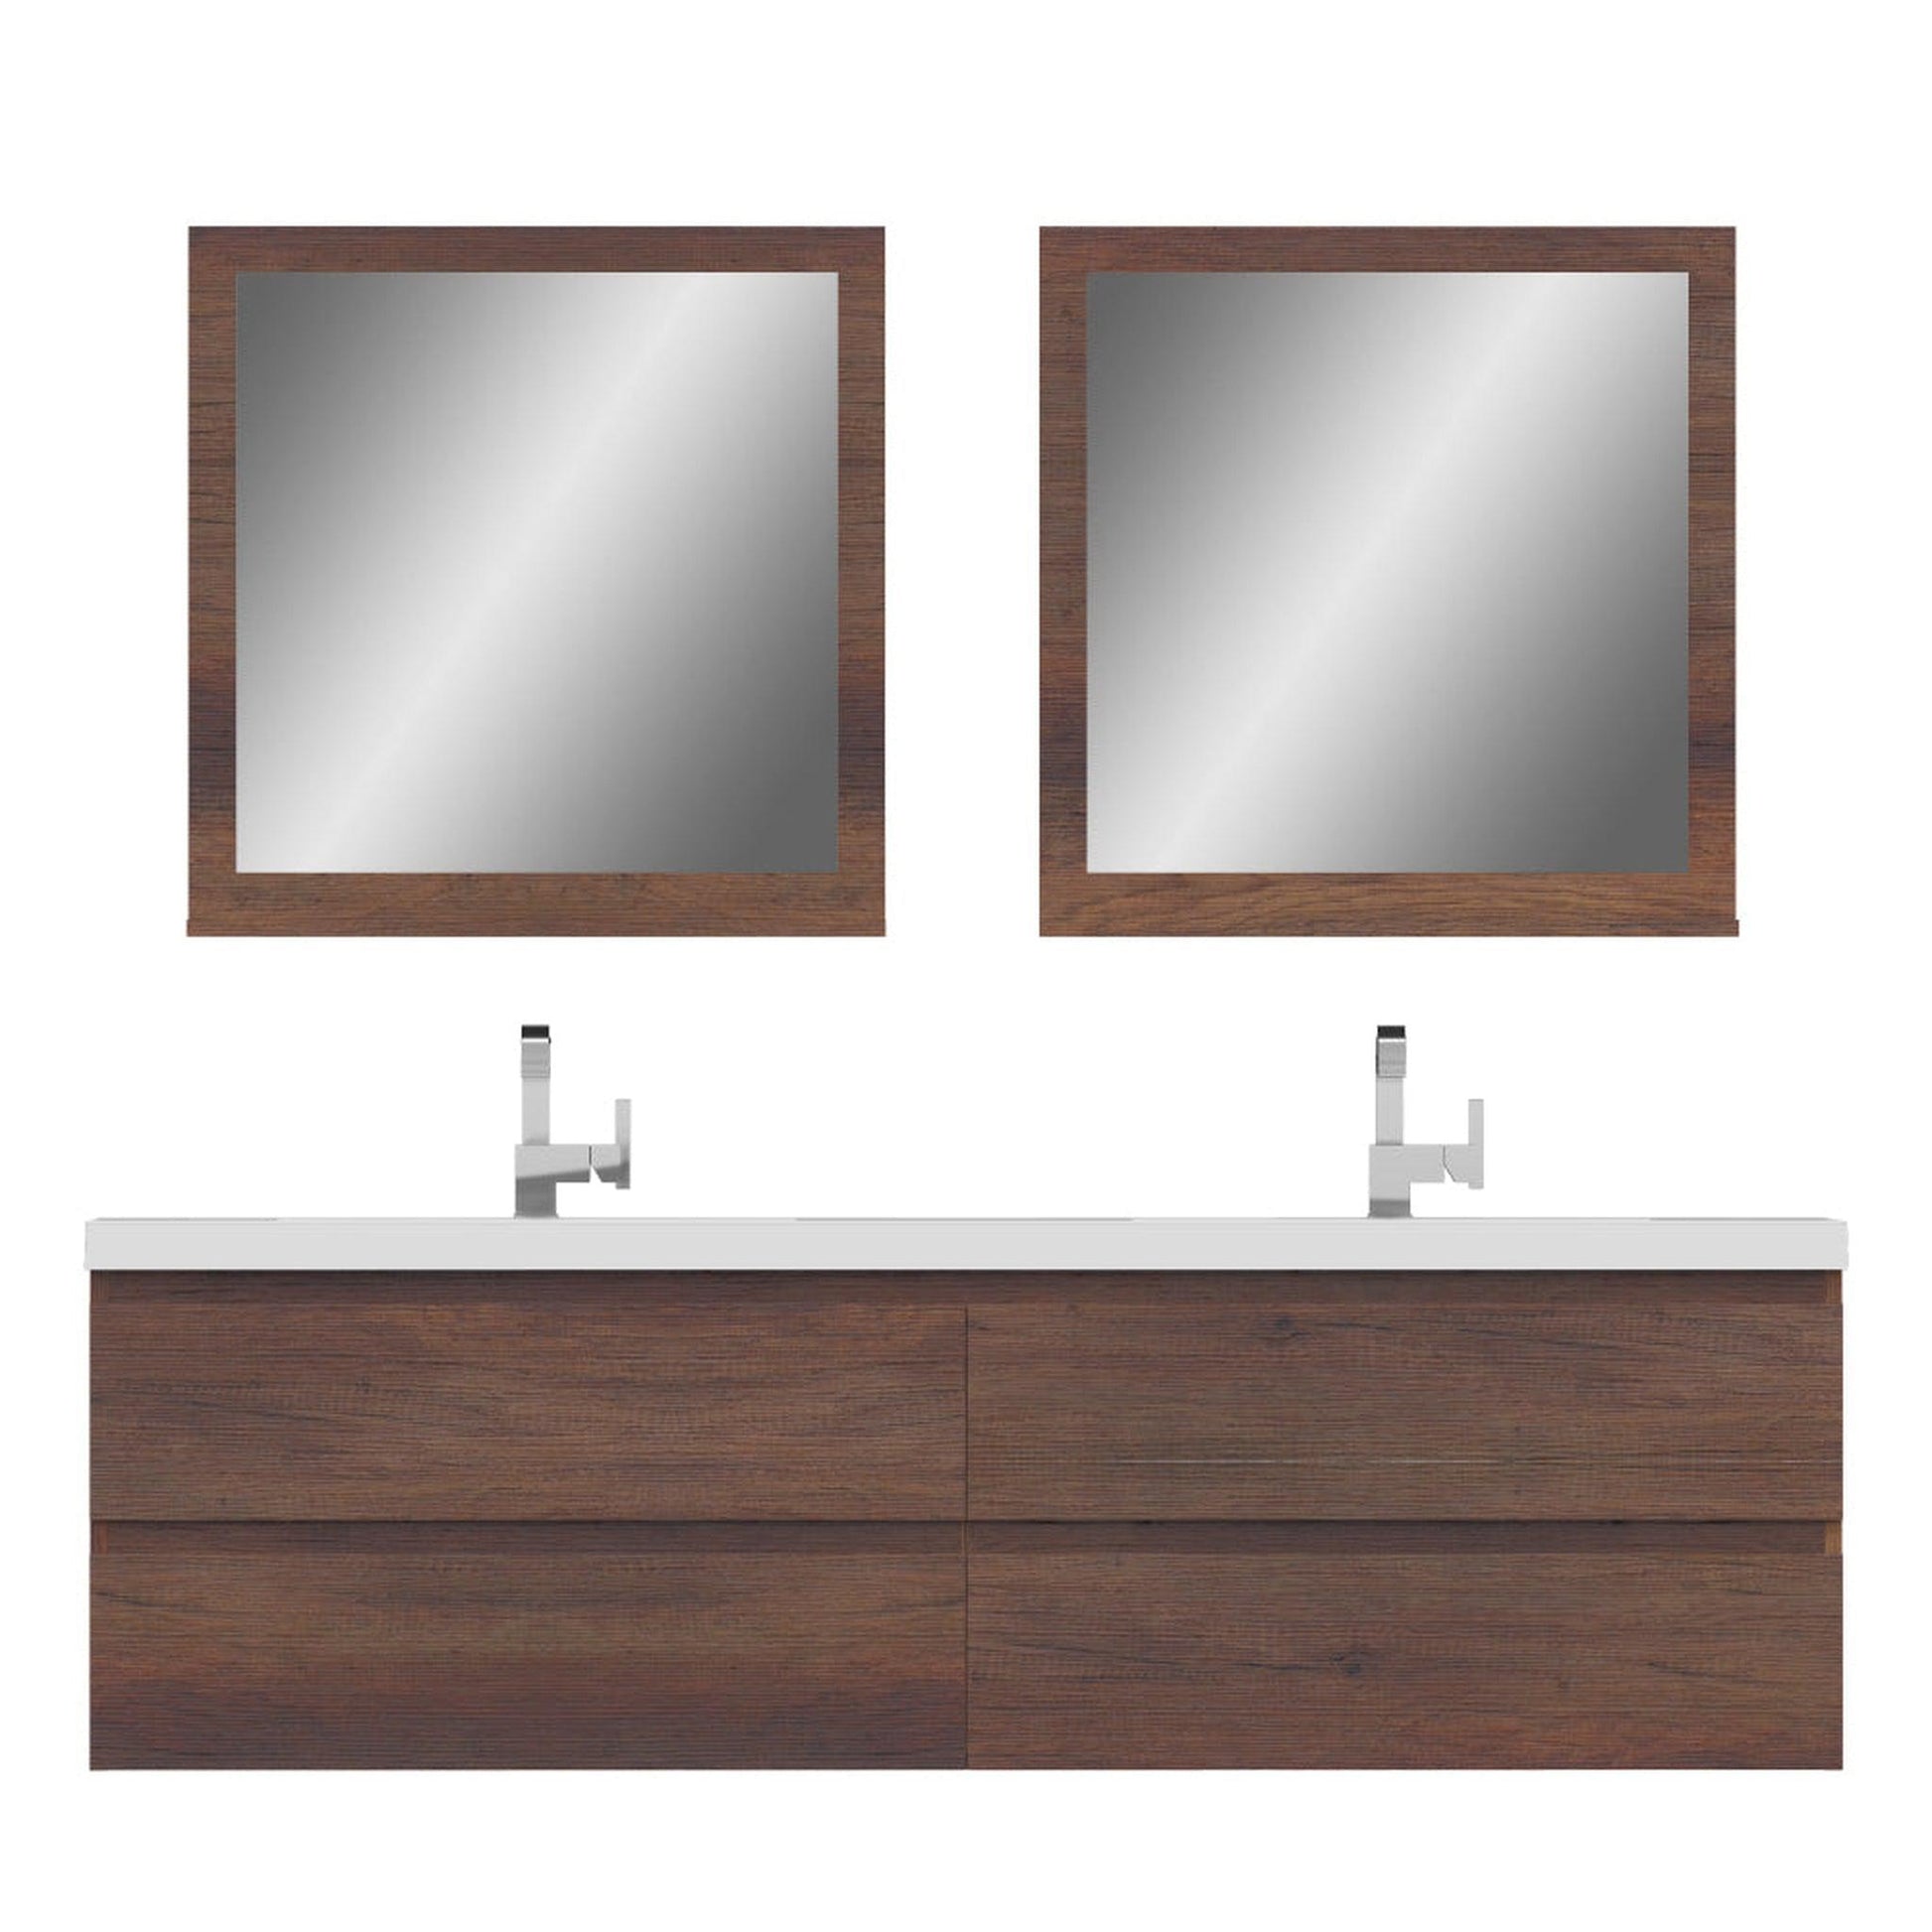 Alya Bath Paterno 72" Double Rosewood Modern Wall Mounted Bathroom Vanity With Acrylic Top and Integrated Sink